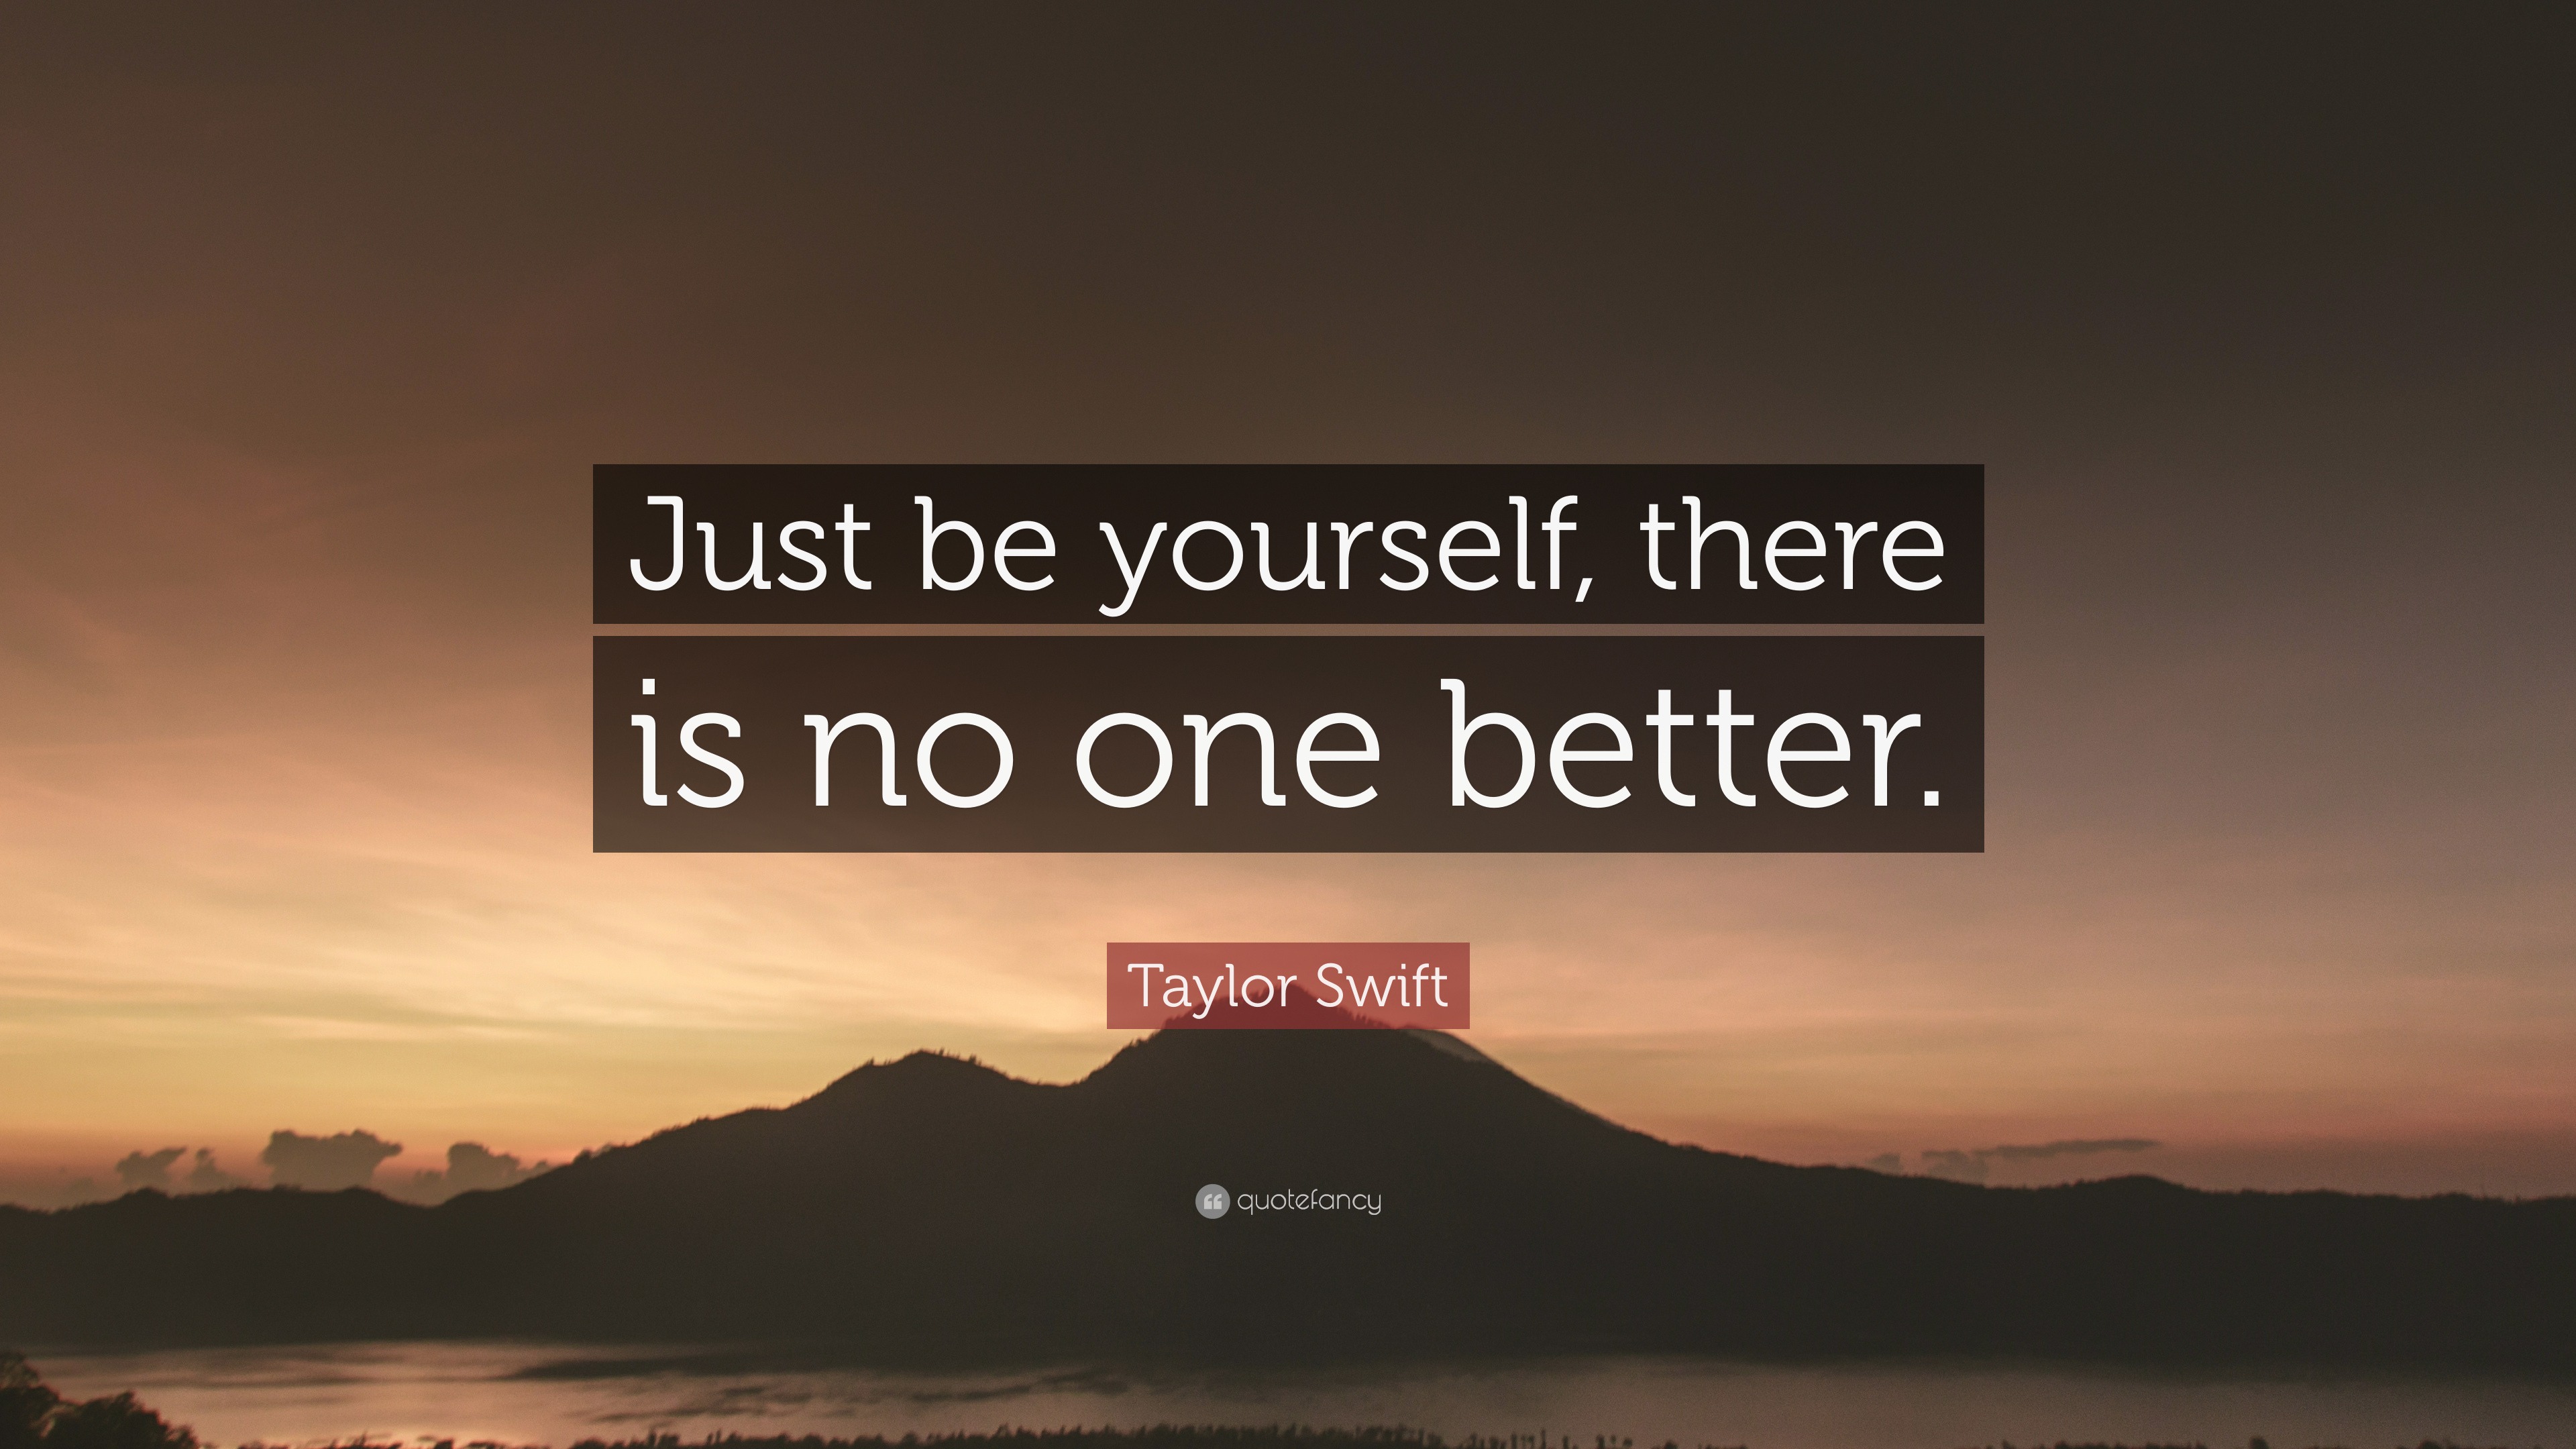 Taylor Swift Quote “just Be Yourself There Is No One Better” 22 Wallpapers Quotefancy